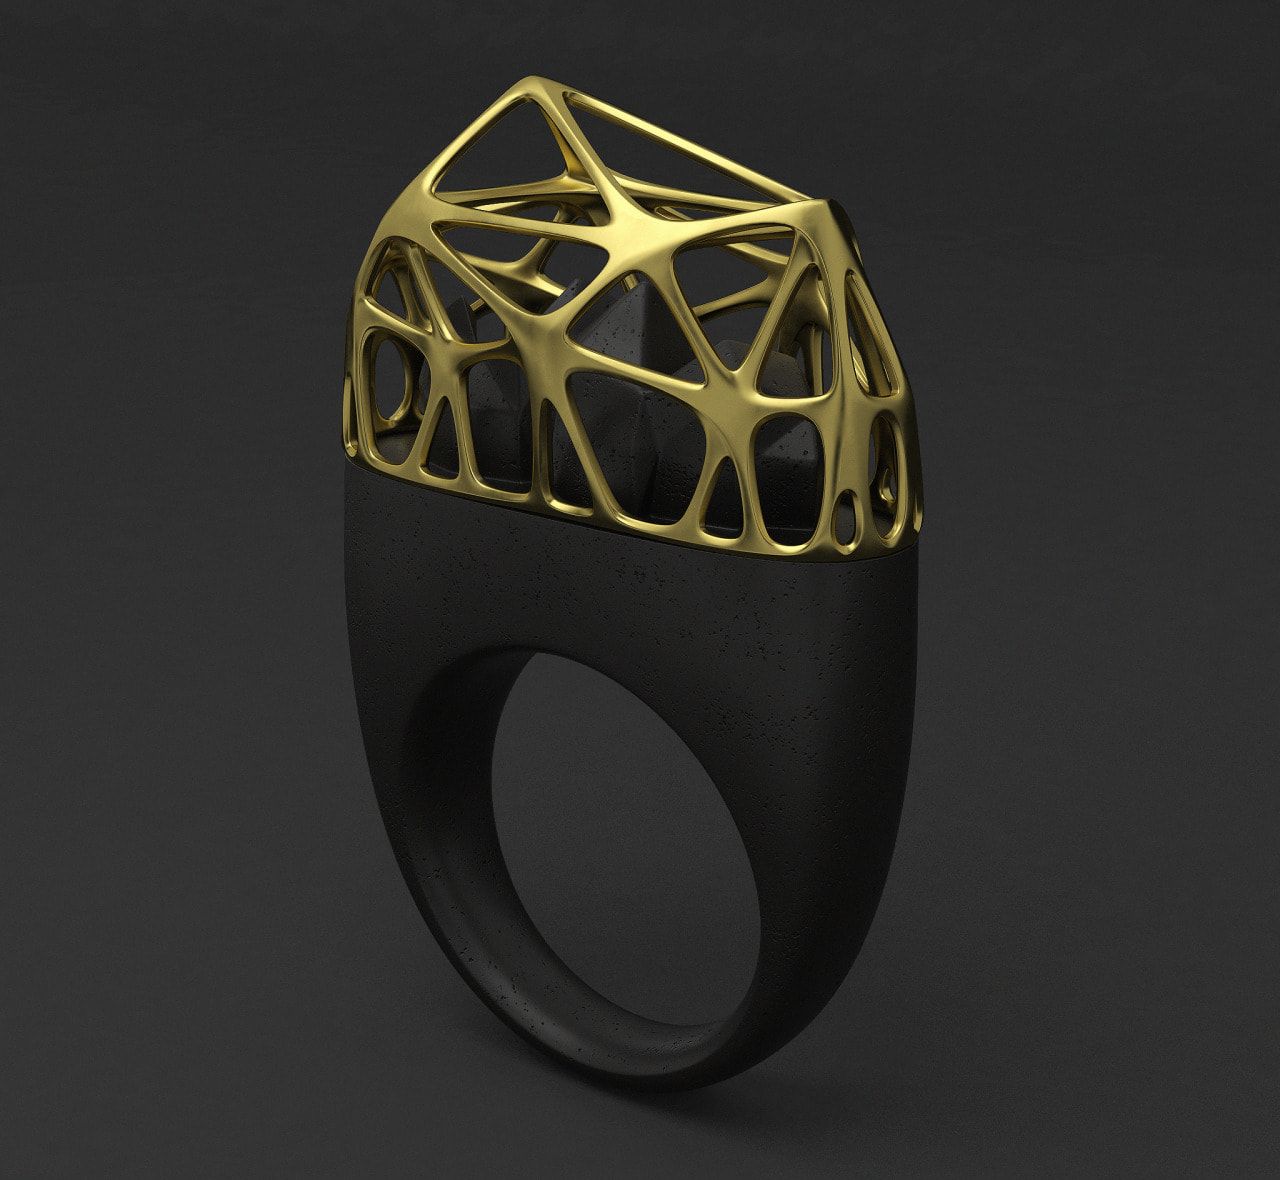 Ring in black and gold designed parametrically